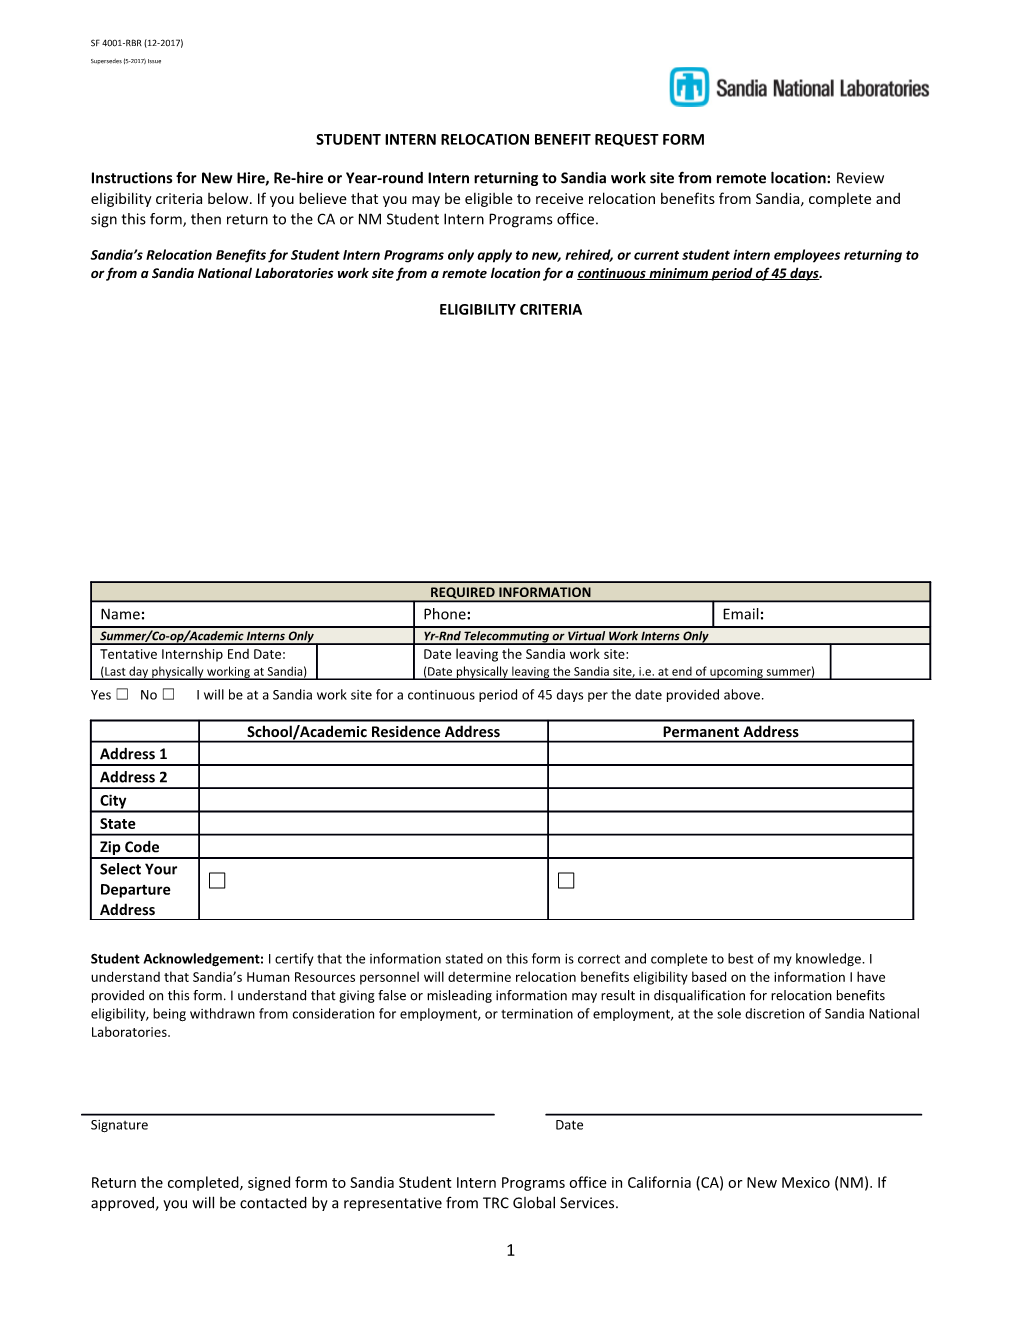 SF 4001-RBR; Student Intern Relocation Benefit Request Form;